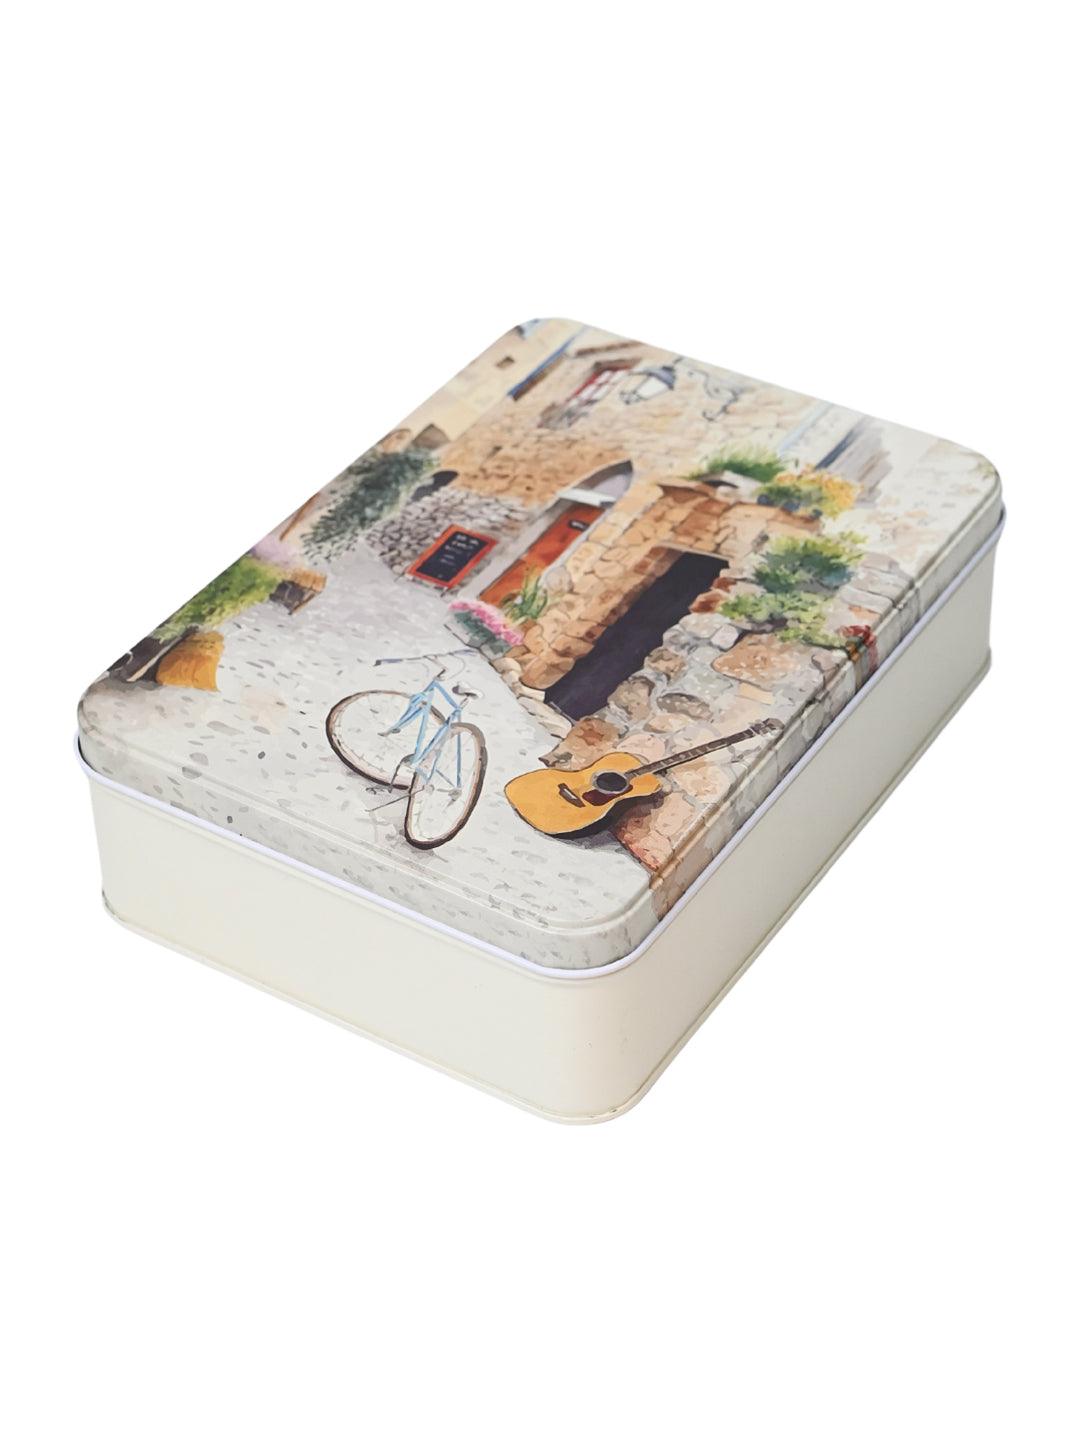 House Print Tin Storage Box Container - Set Of 3, Multi Color - MARKET99